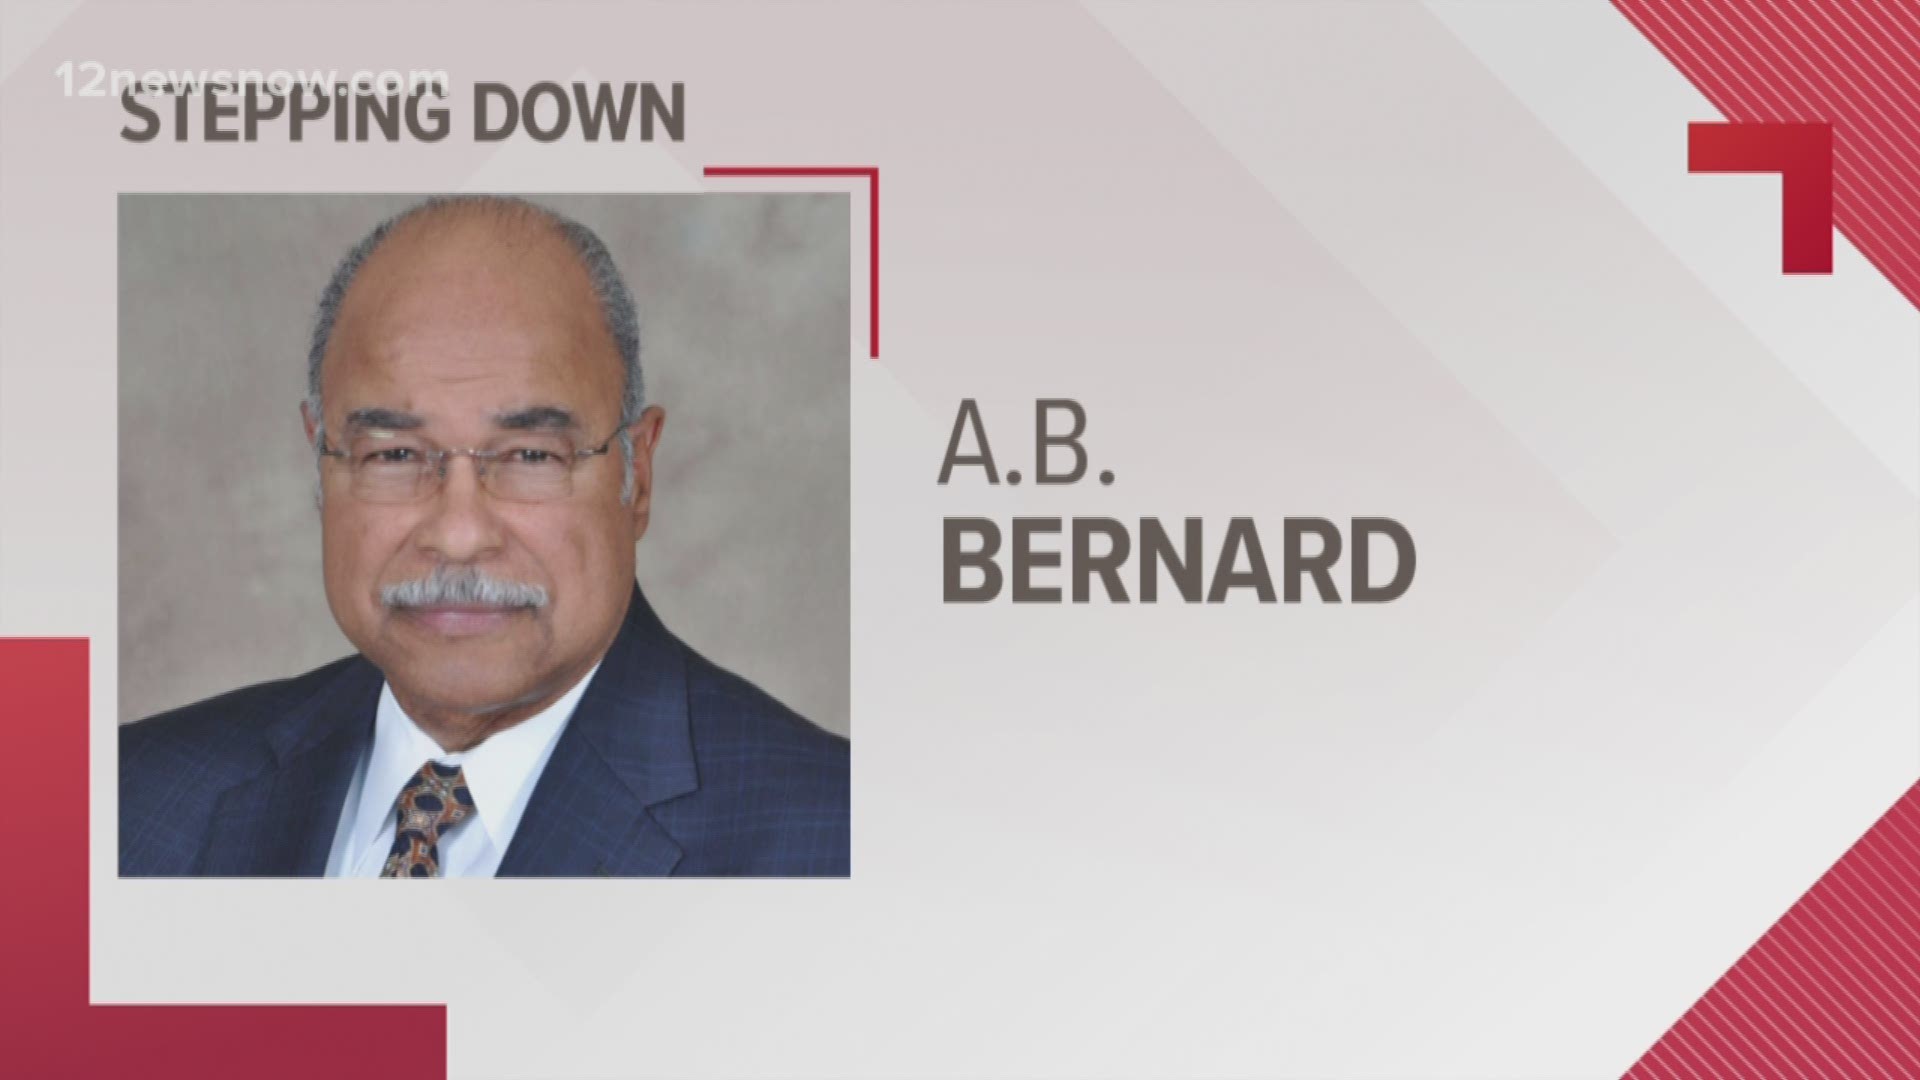 He cited differences with Beaumont ISD's superintendent.